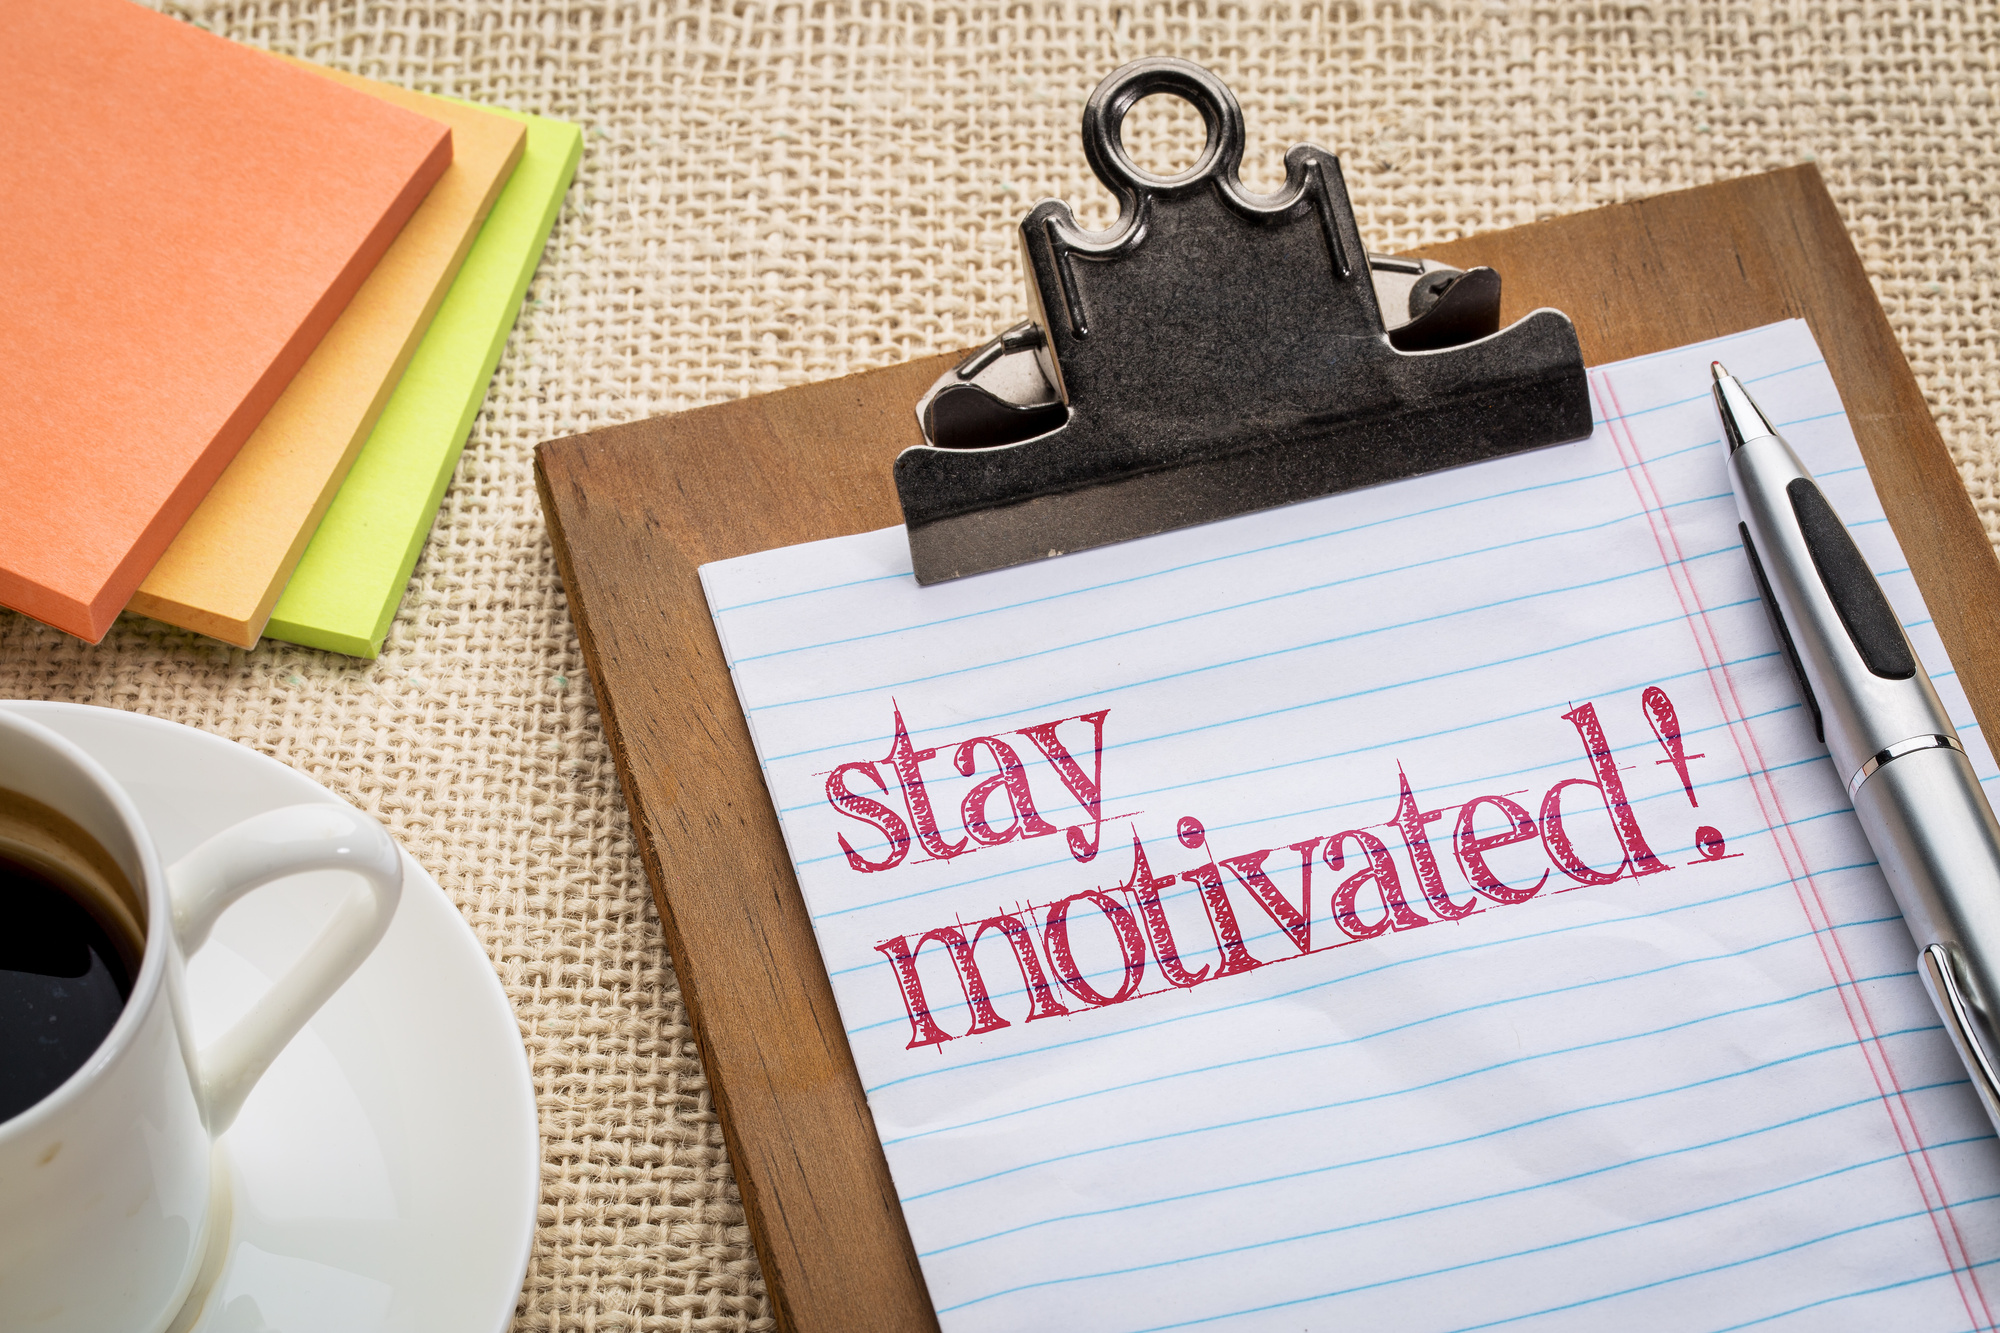 Stay motivated text on clipboard